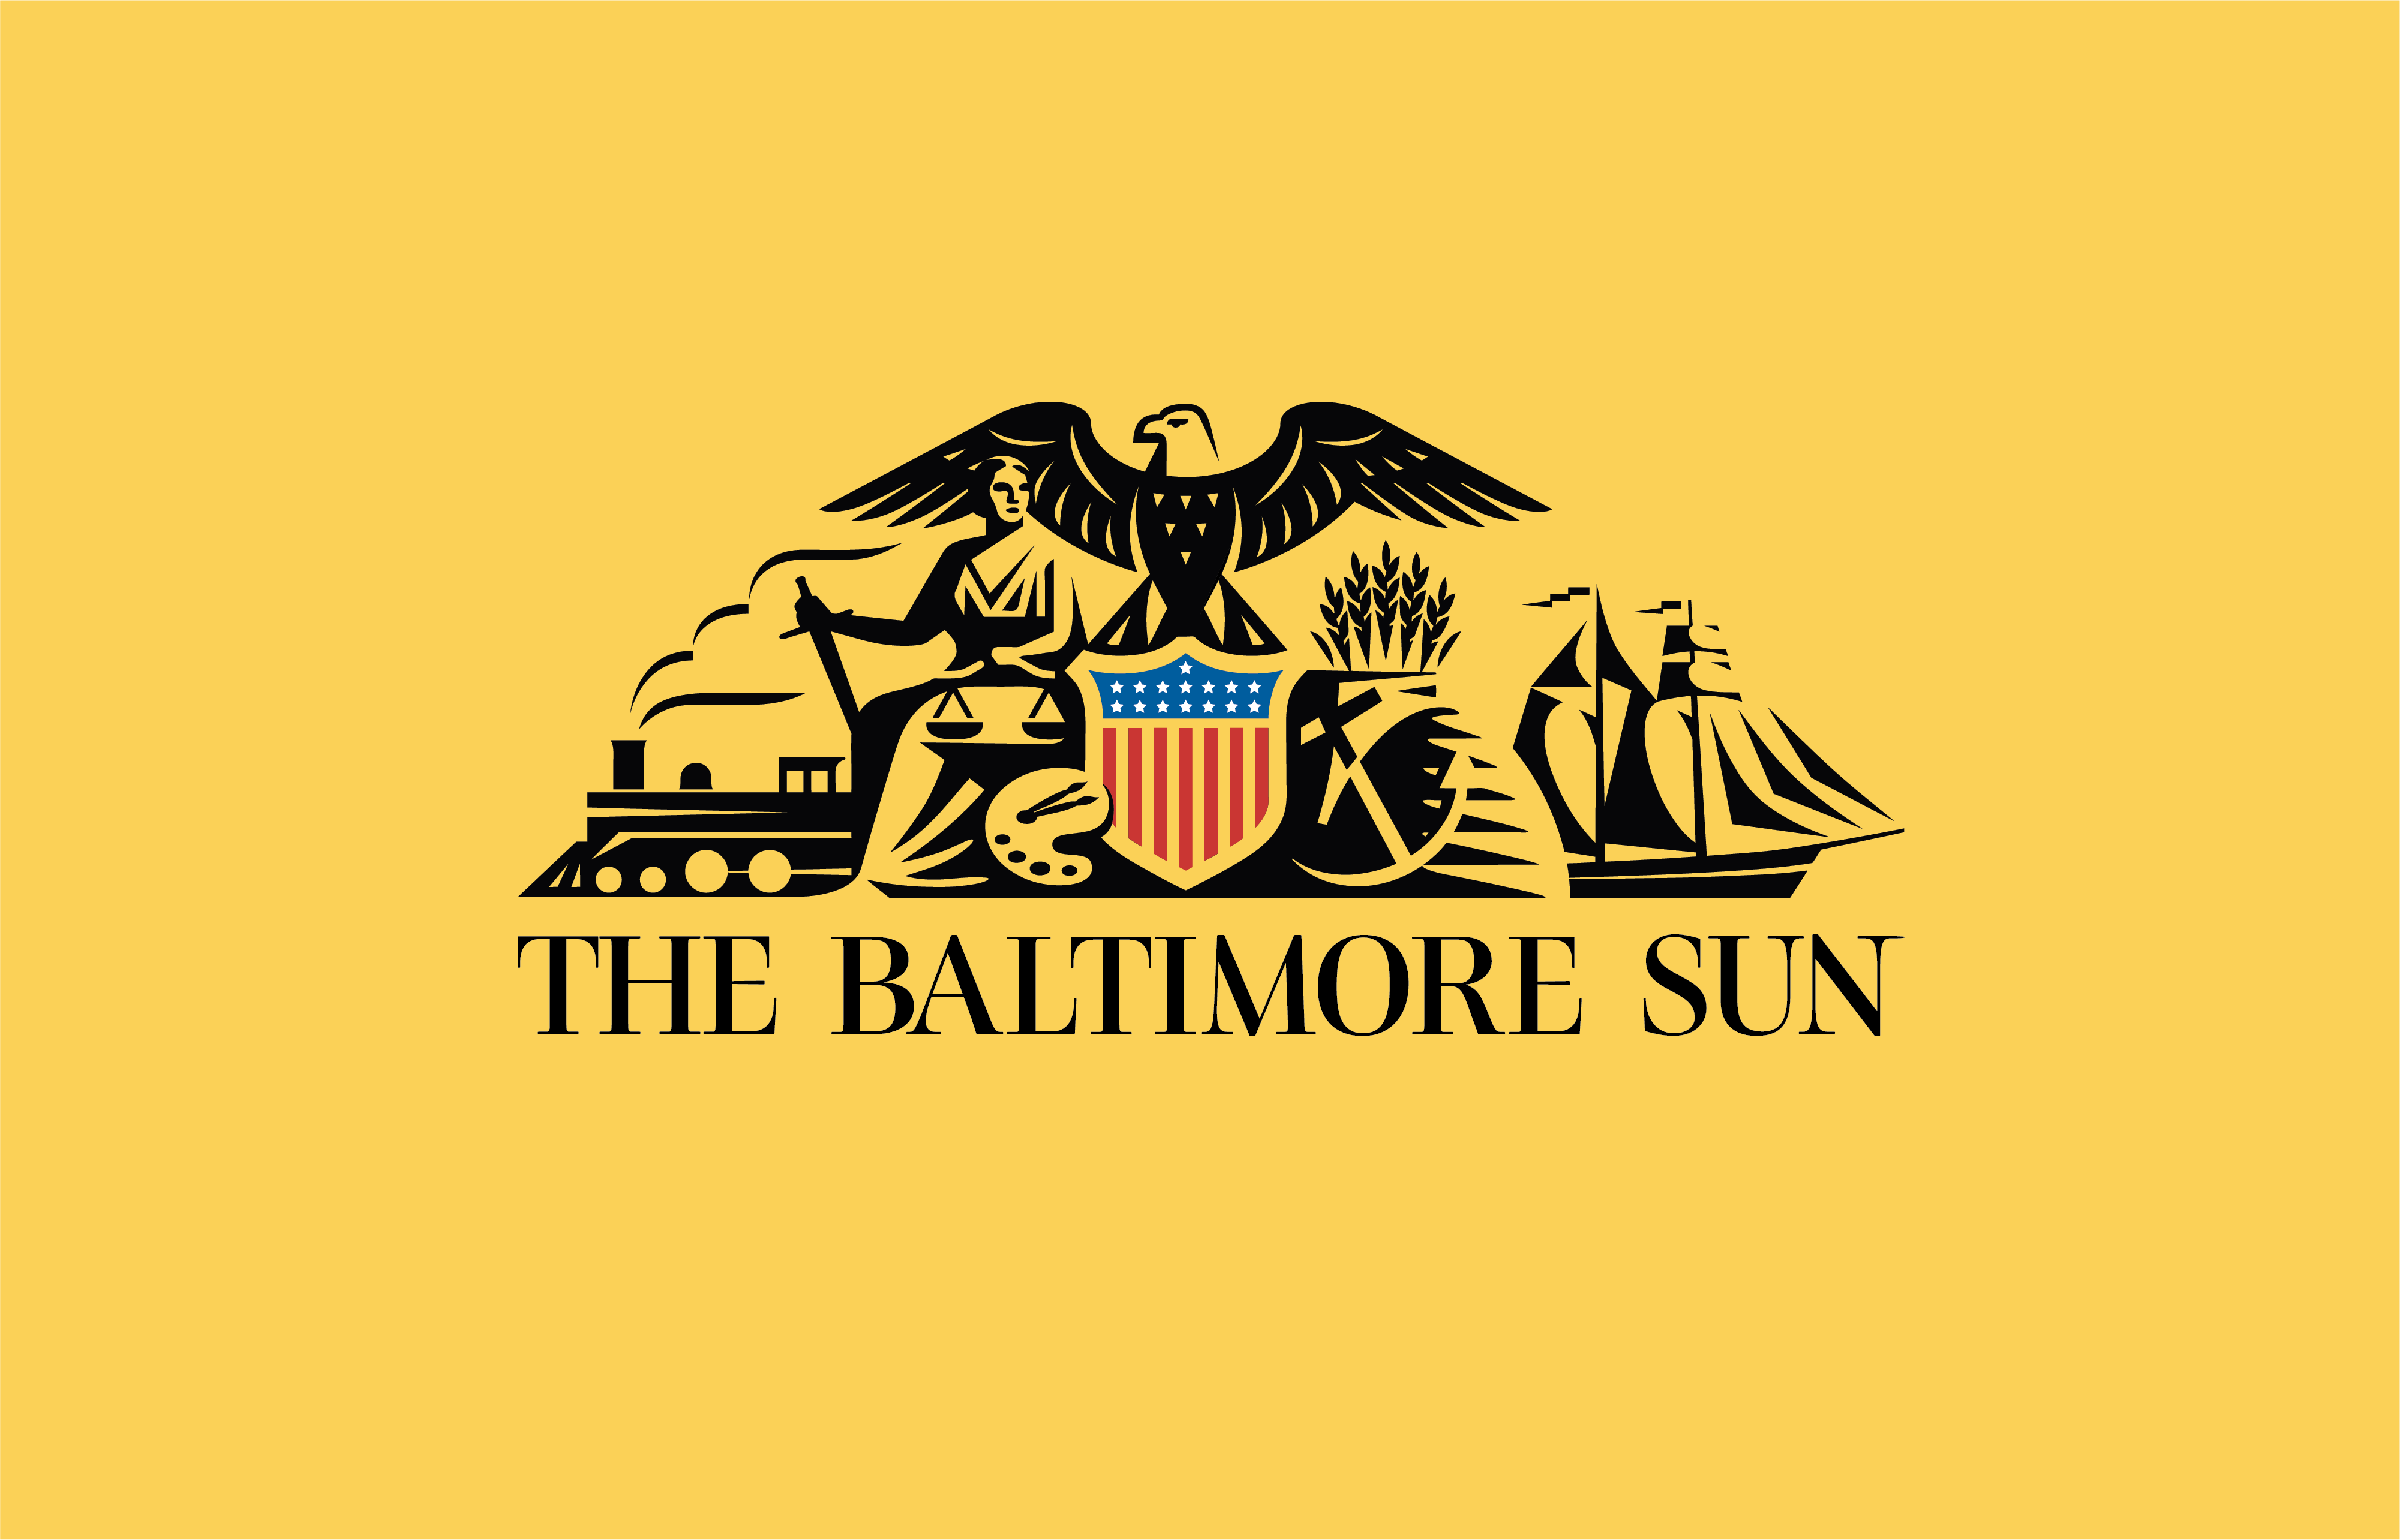 Baltimore, squeegee boys and a robbery — in perspective